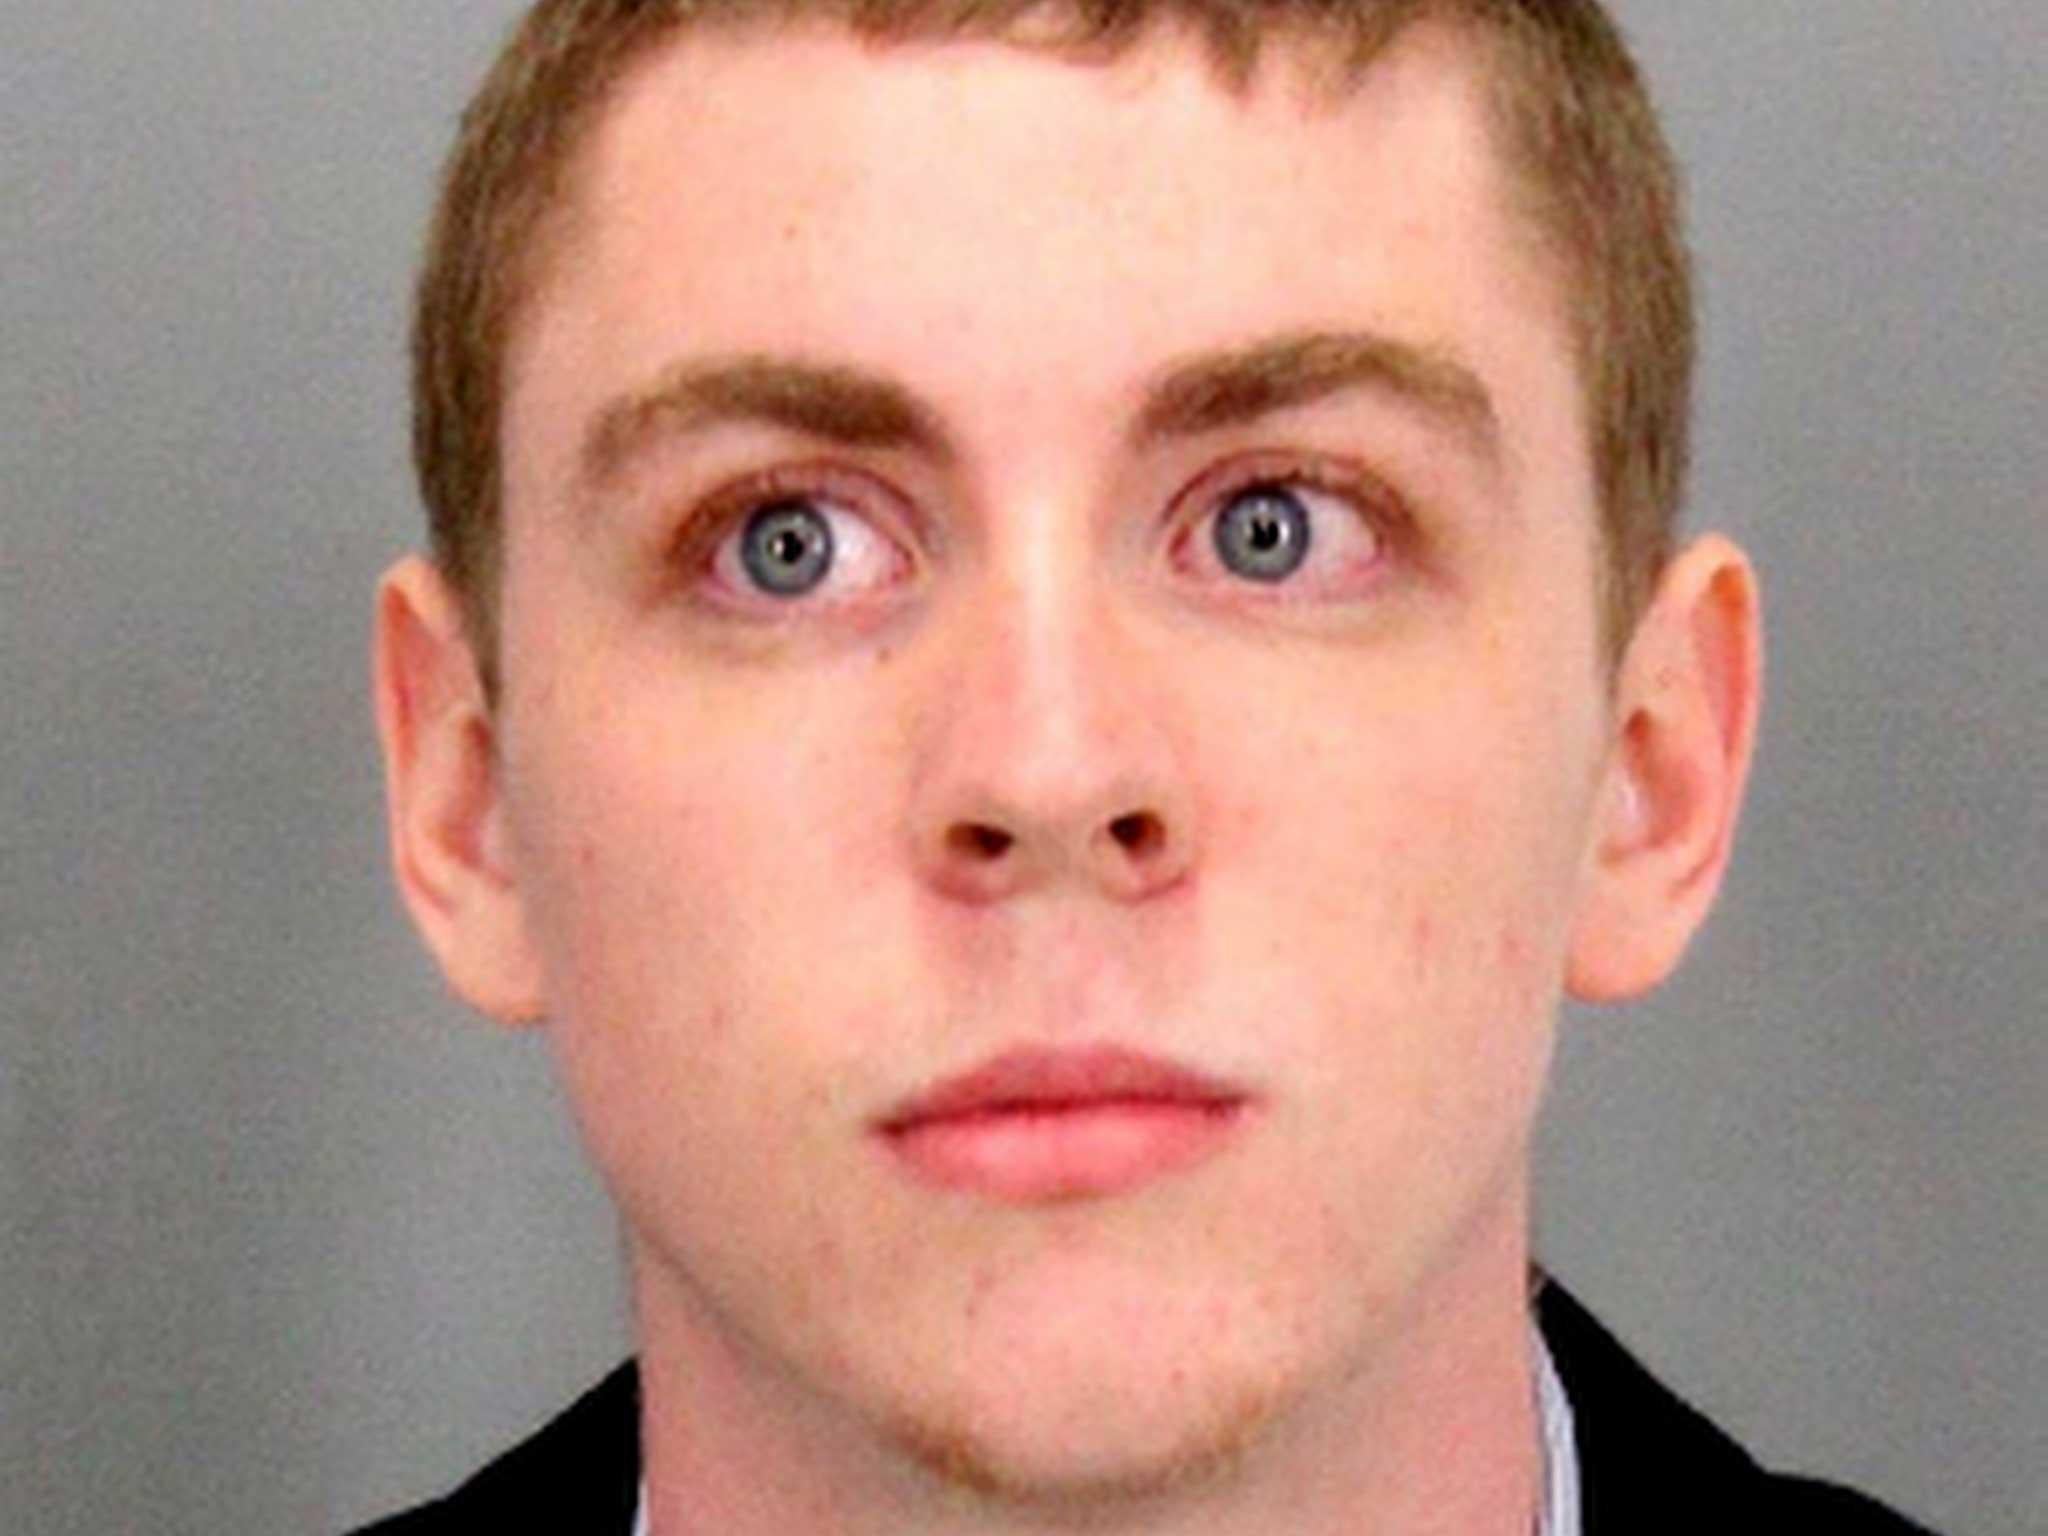 Stanford rape case Brock Turner supporters apologise and say of course he should be held accountable The Independent The Independent